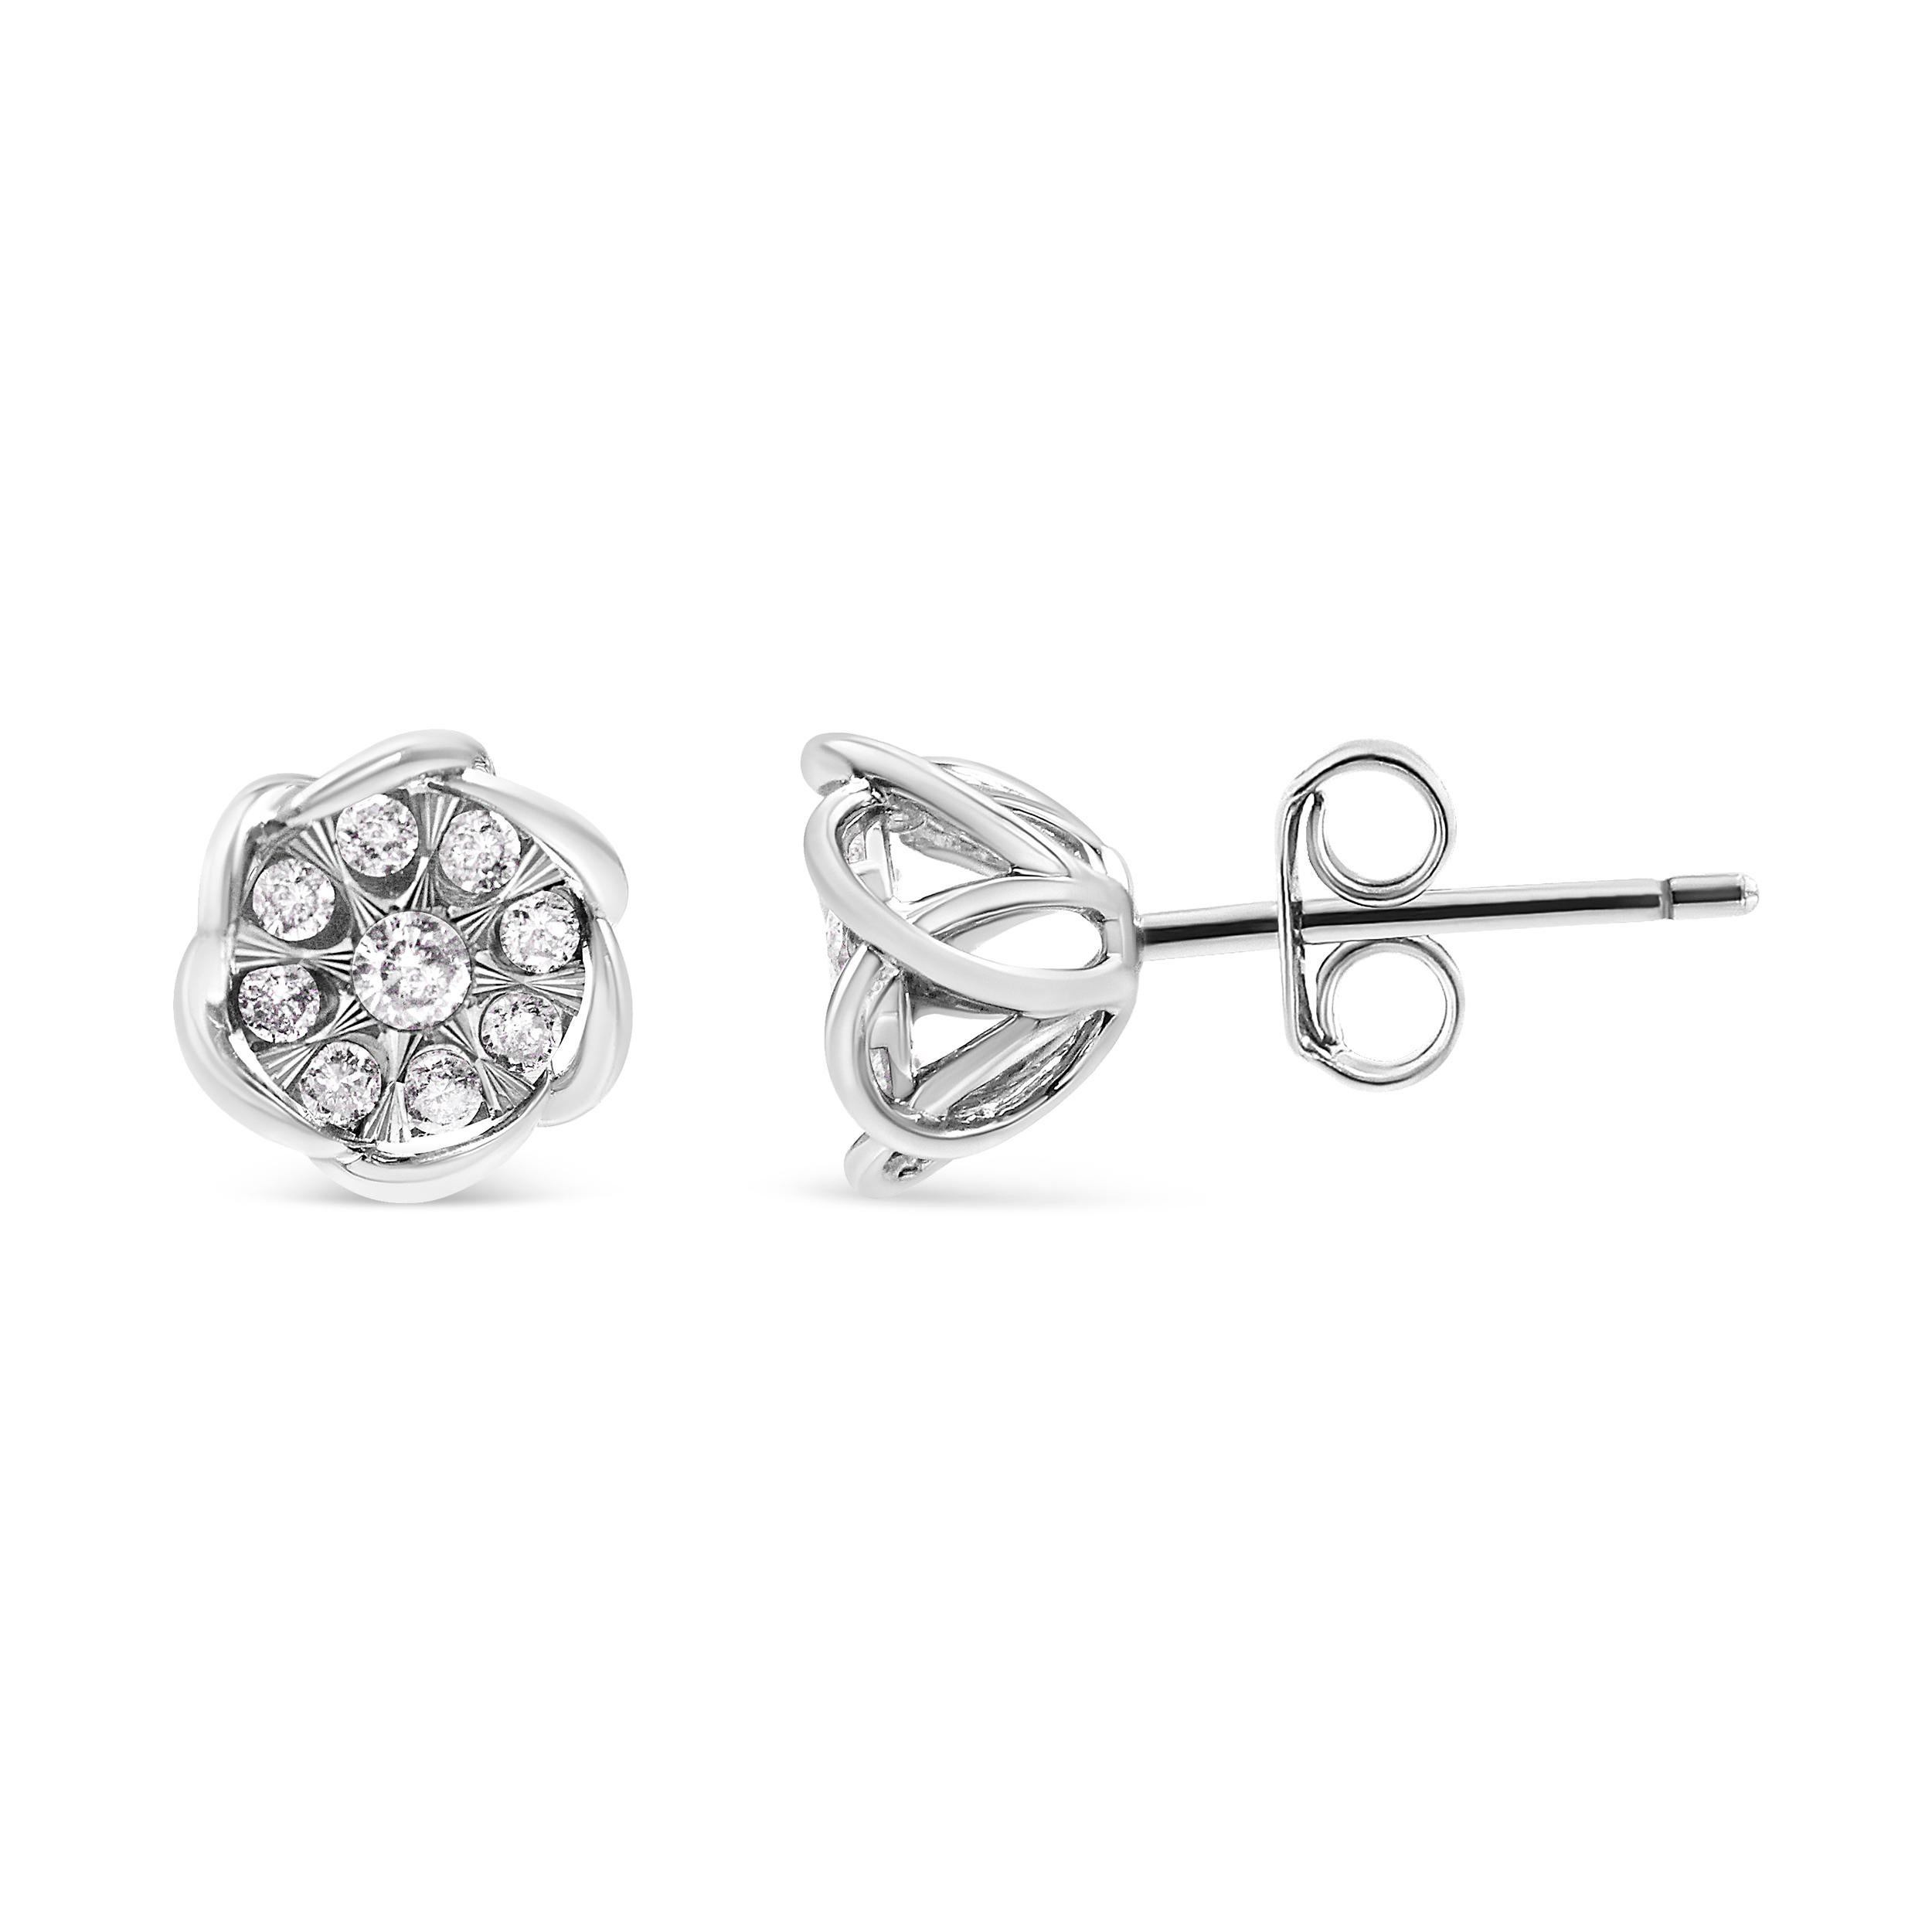 Contemporary 10K White Gold 1/2 Carat Diamond Floral Cluster Swirl Stud Earrings